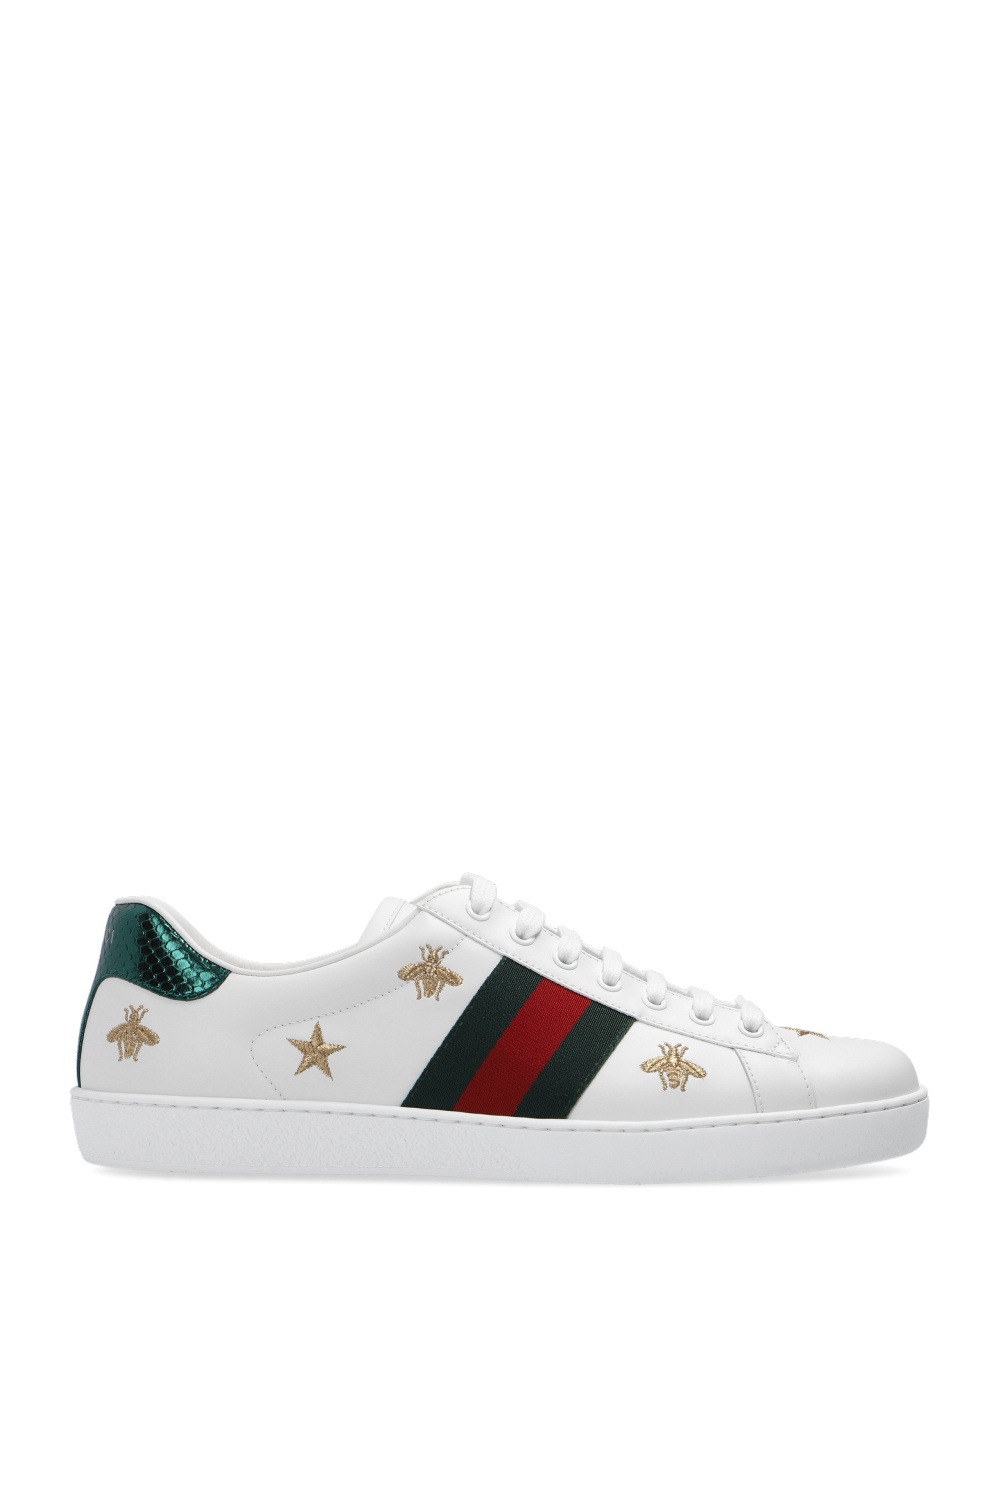 Ace' sneakers Gucci - Vitkac France